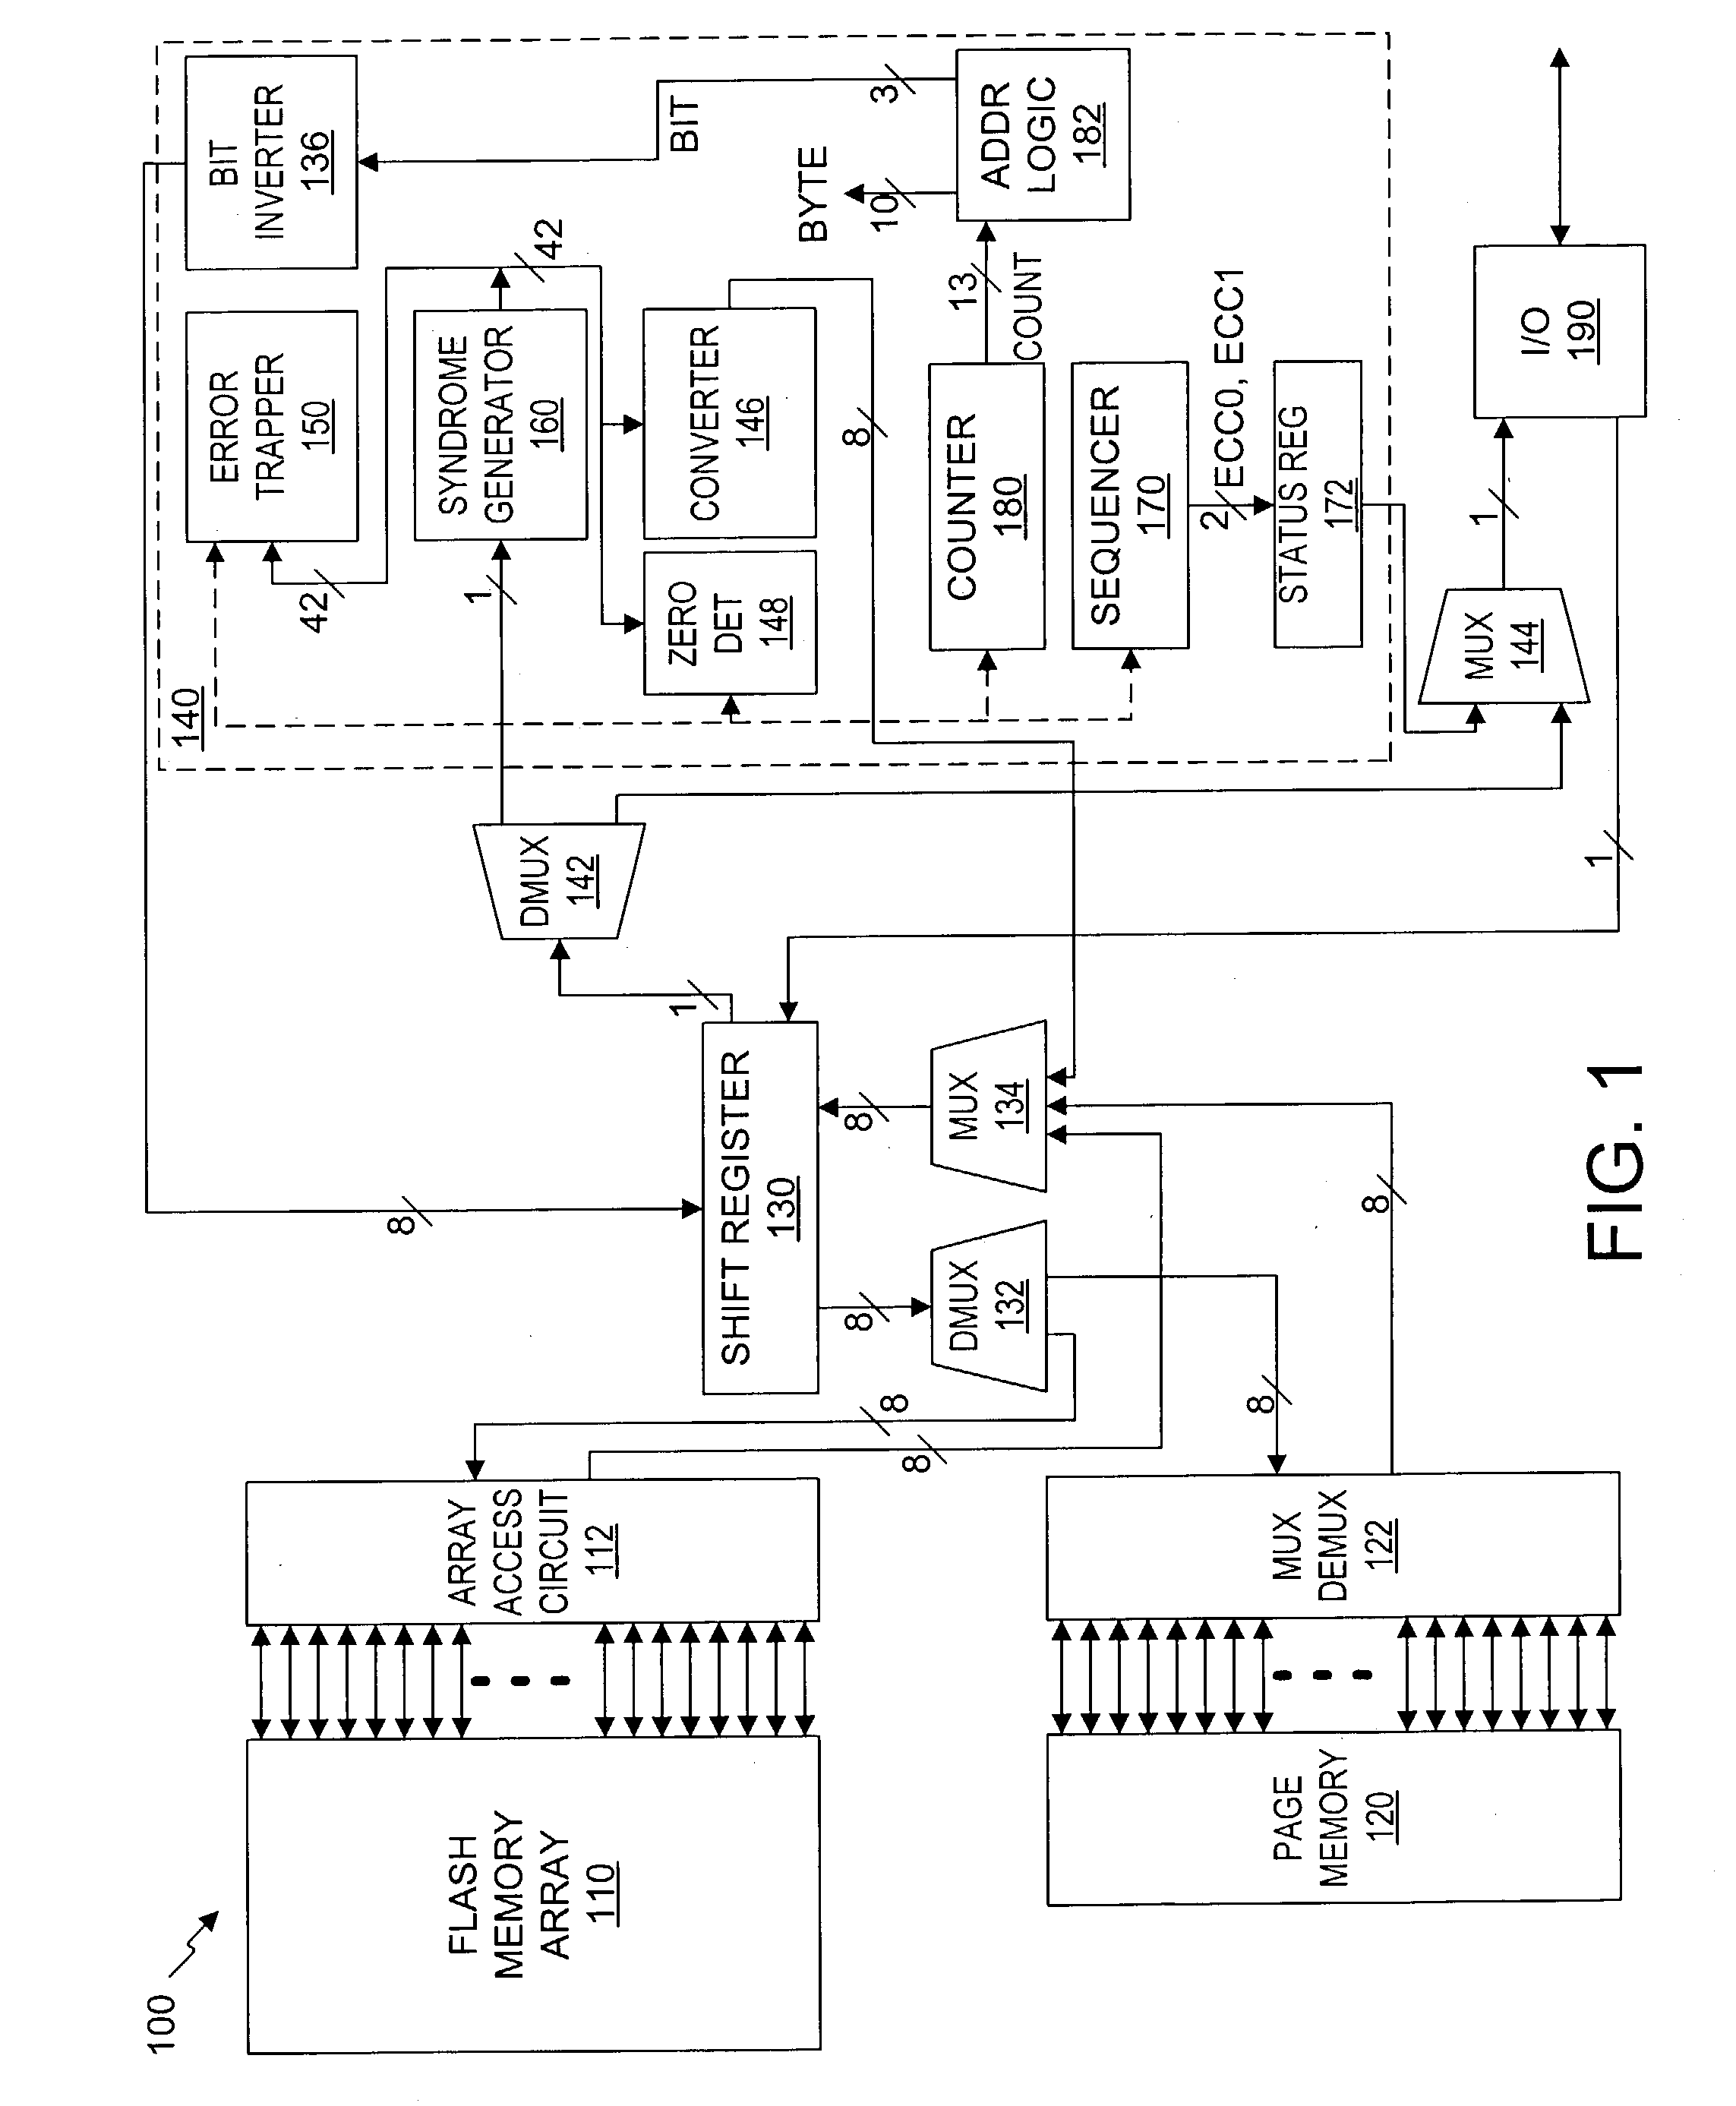 Serial flash integrated circuit having error detection and correction